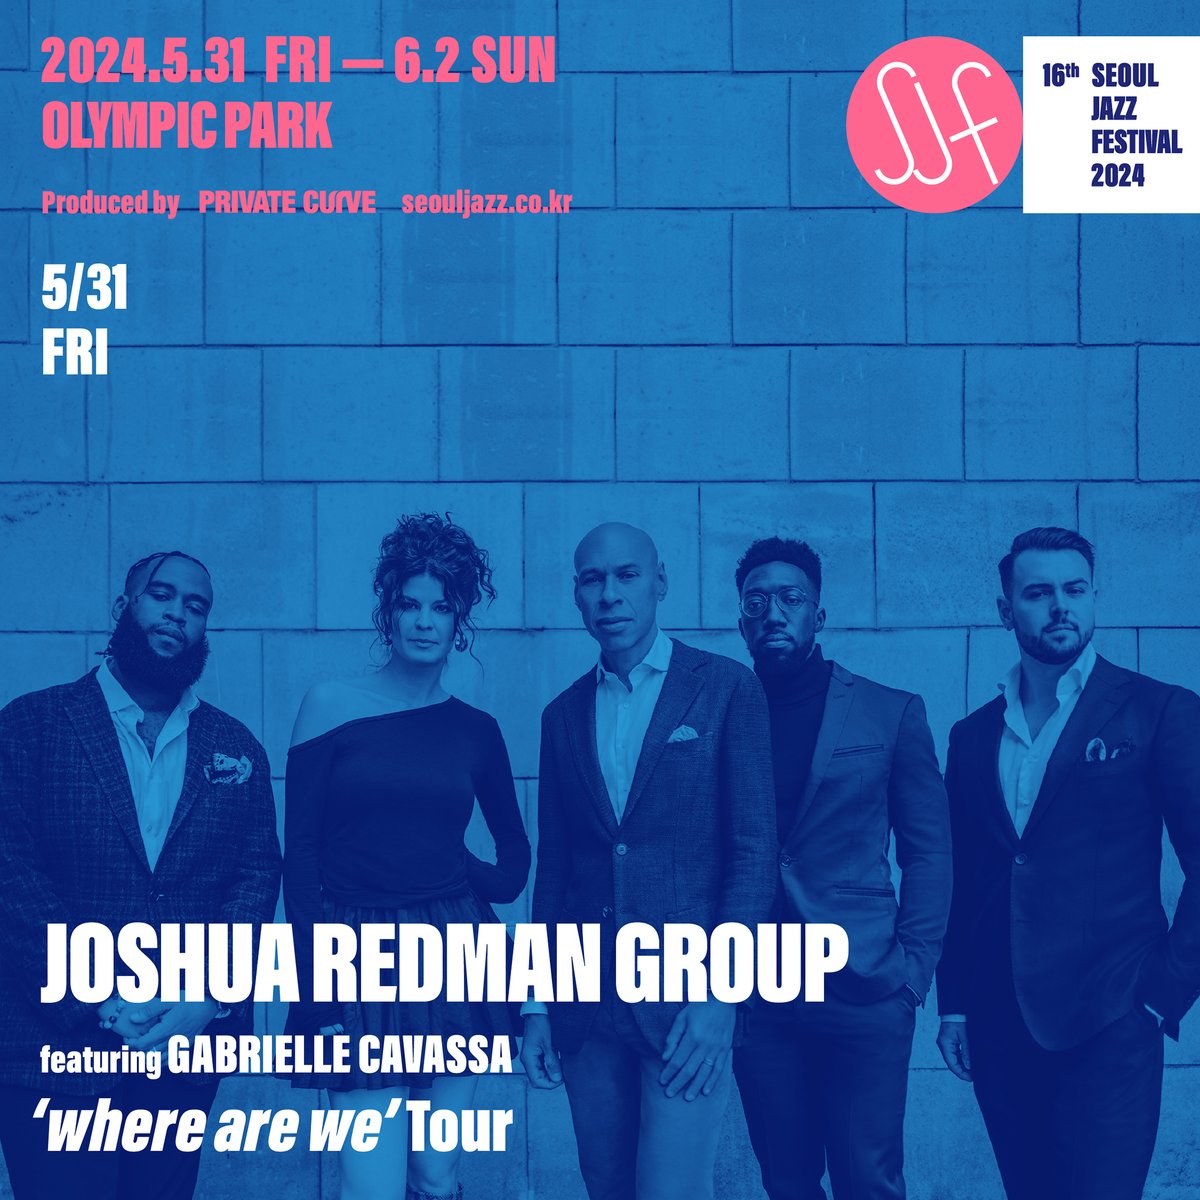 Joshua Redman Group will be at the @SeoulJazzFest Friday May 31st! Can't wait to see you all there and kick off the summer at the Olympic Park!